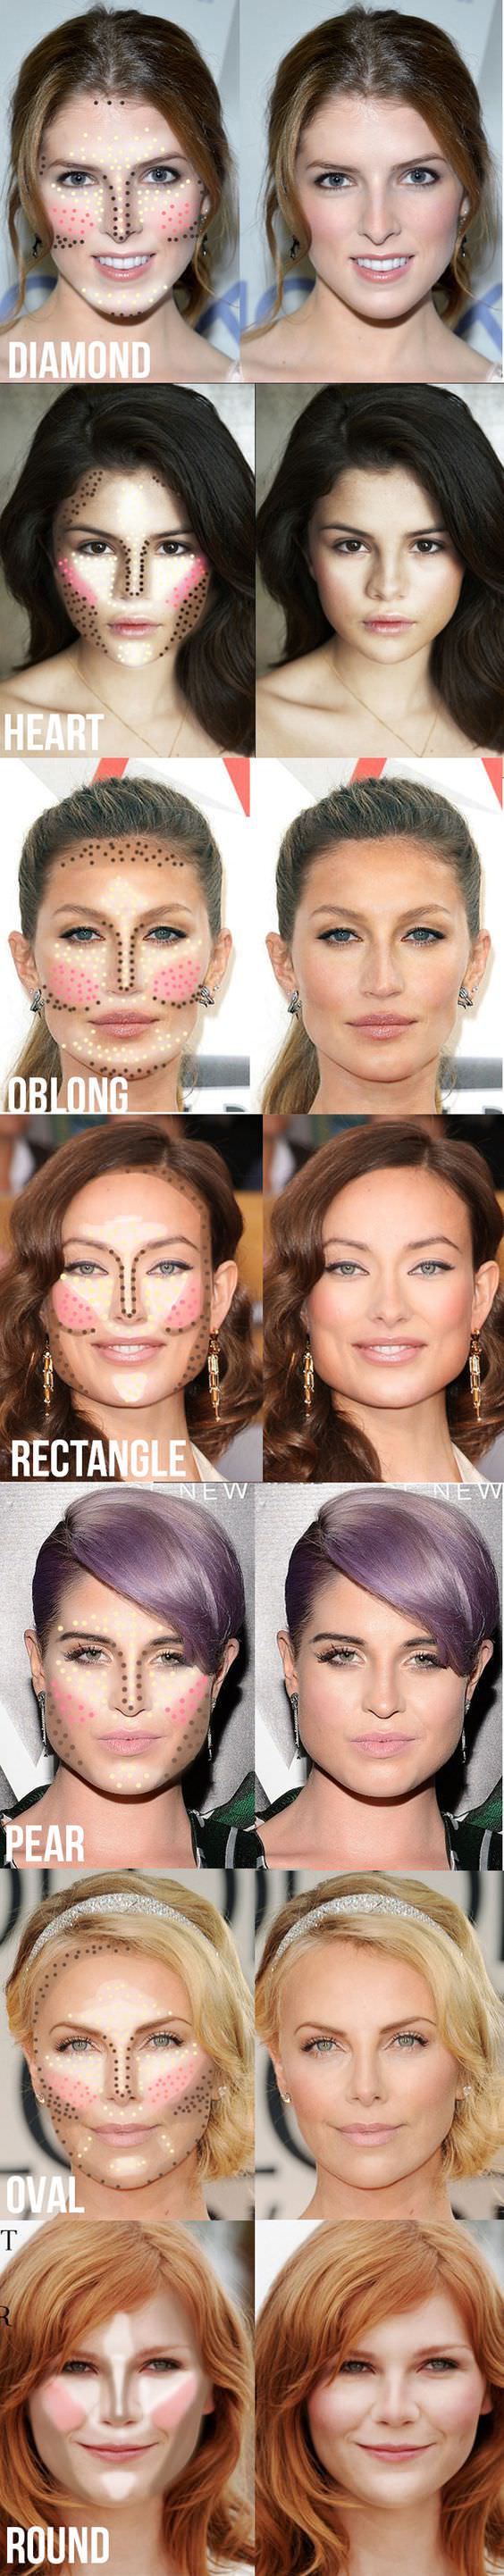 We’ve put together 20 highlighting and contouring hacks, tips, and tricks from Pinterest that should make this whole process a lot easier.